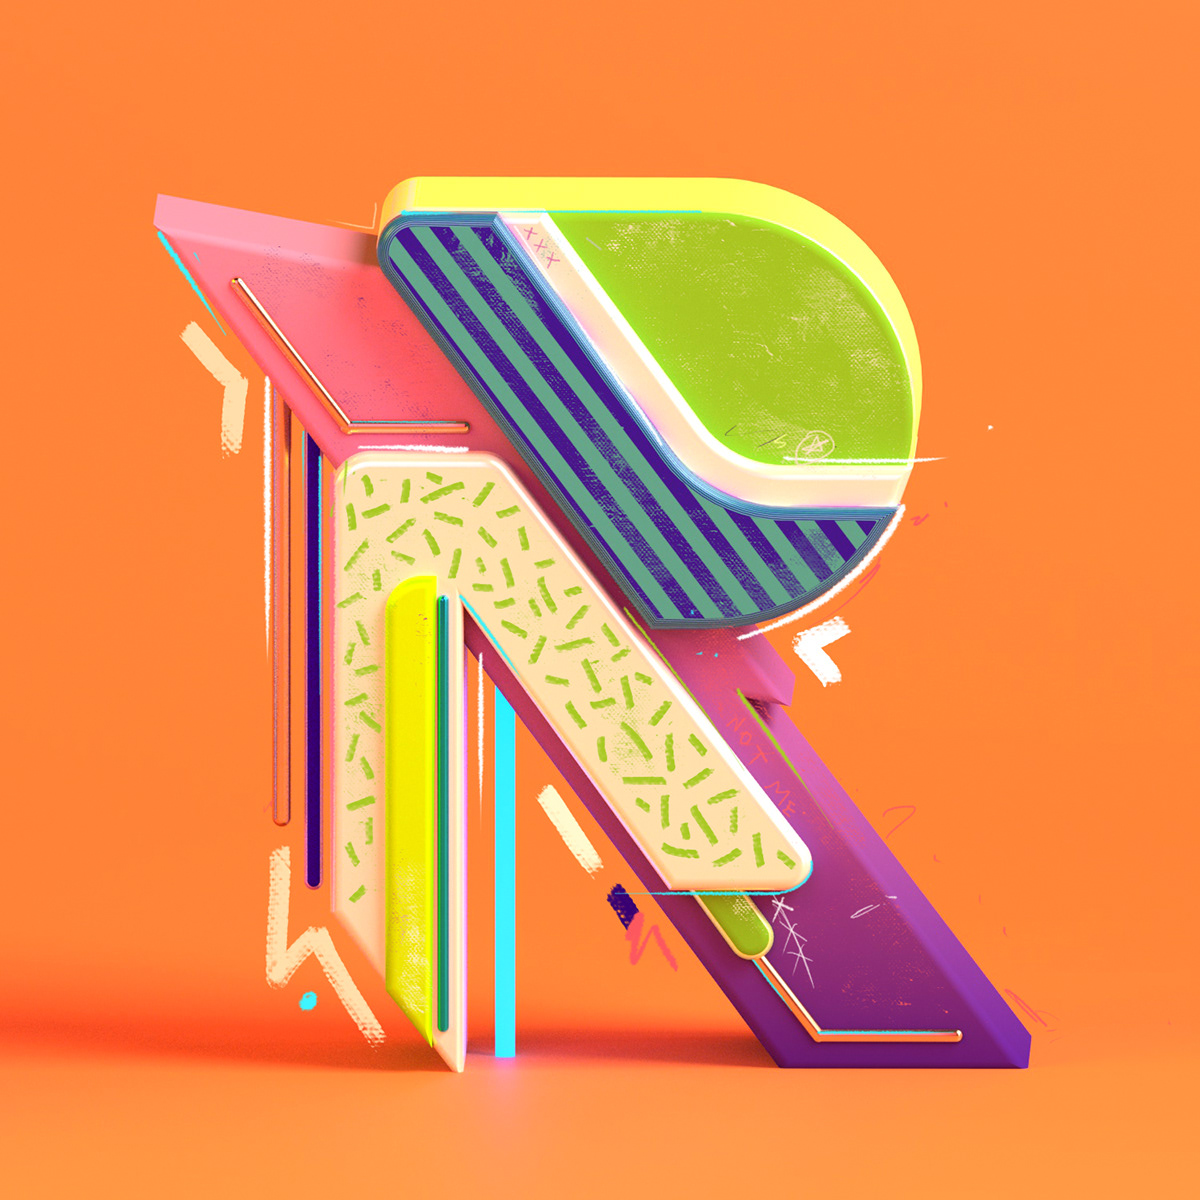 36daysoftype font 36days 3DType 3D grunge punk Gaming color Fun